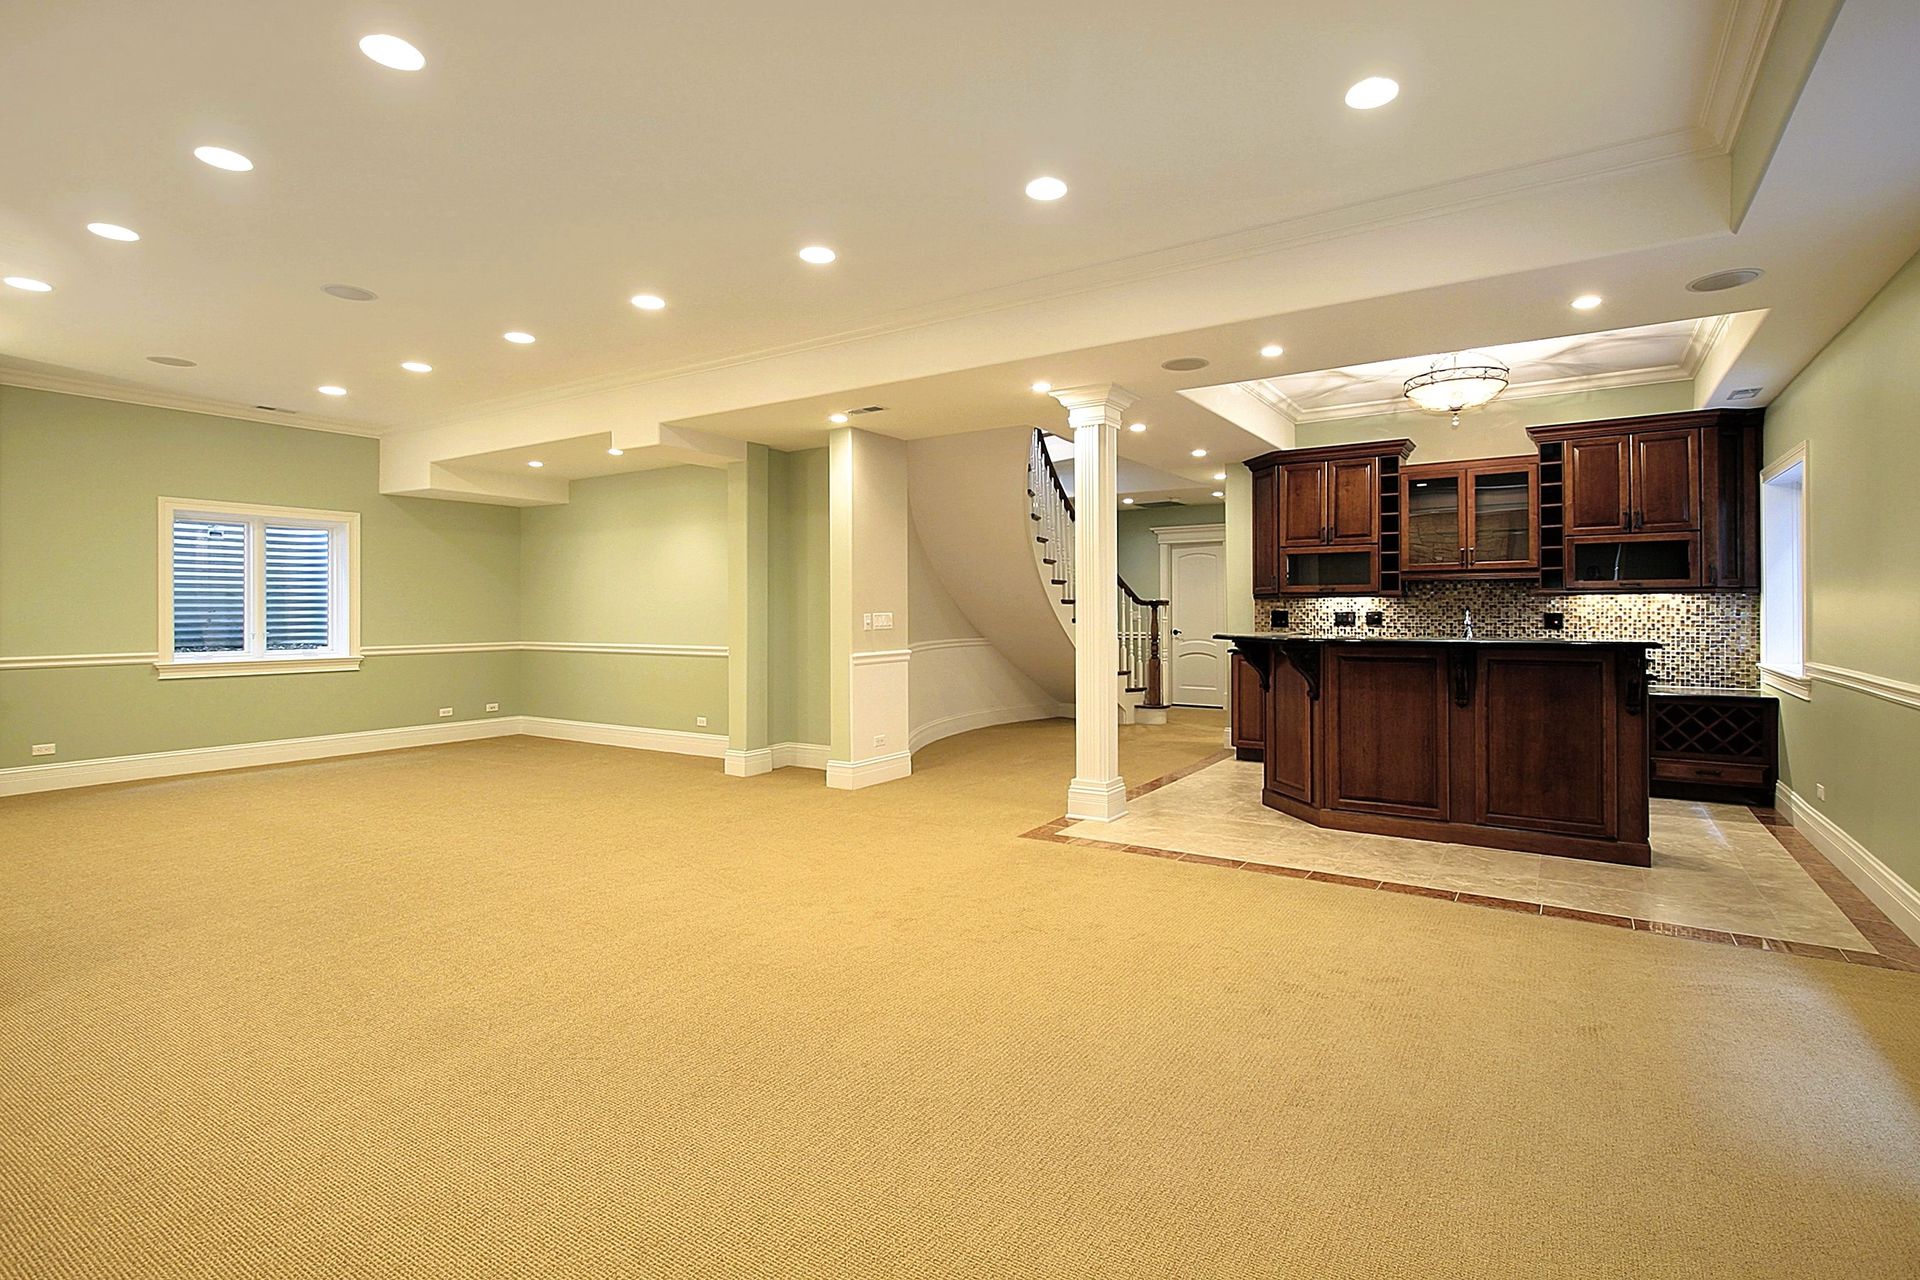 Image of a newly renovated basement with a bar area